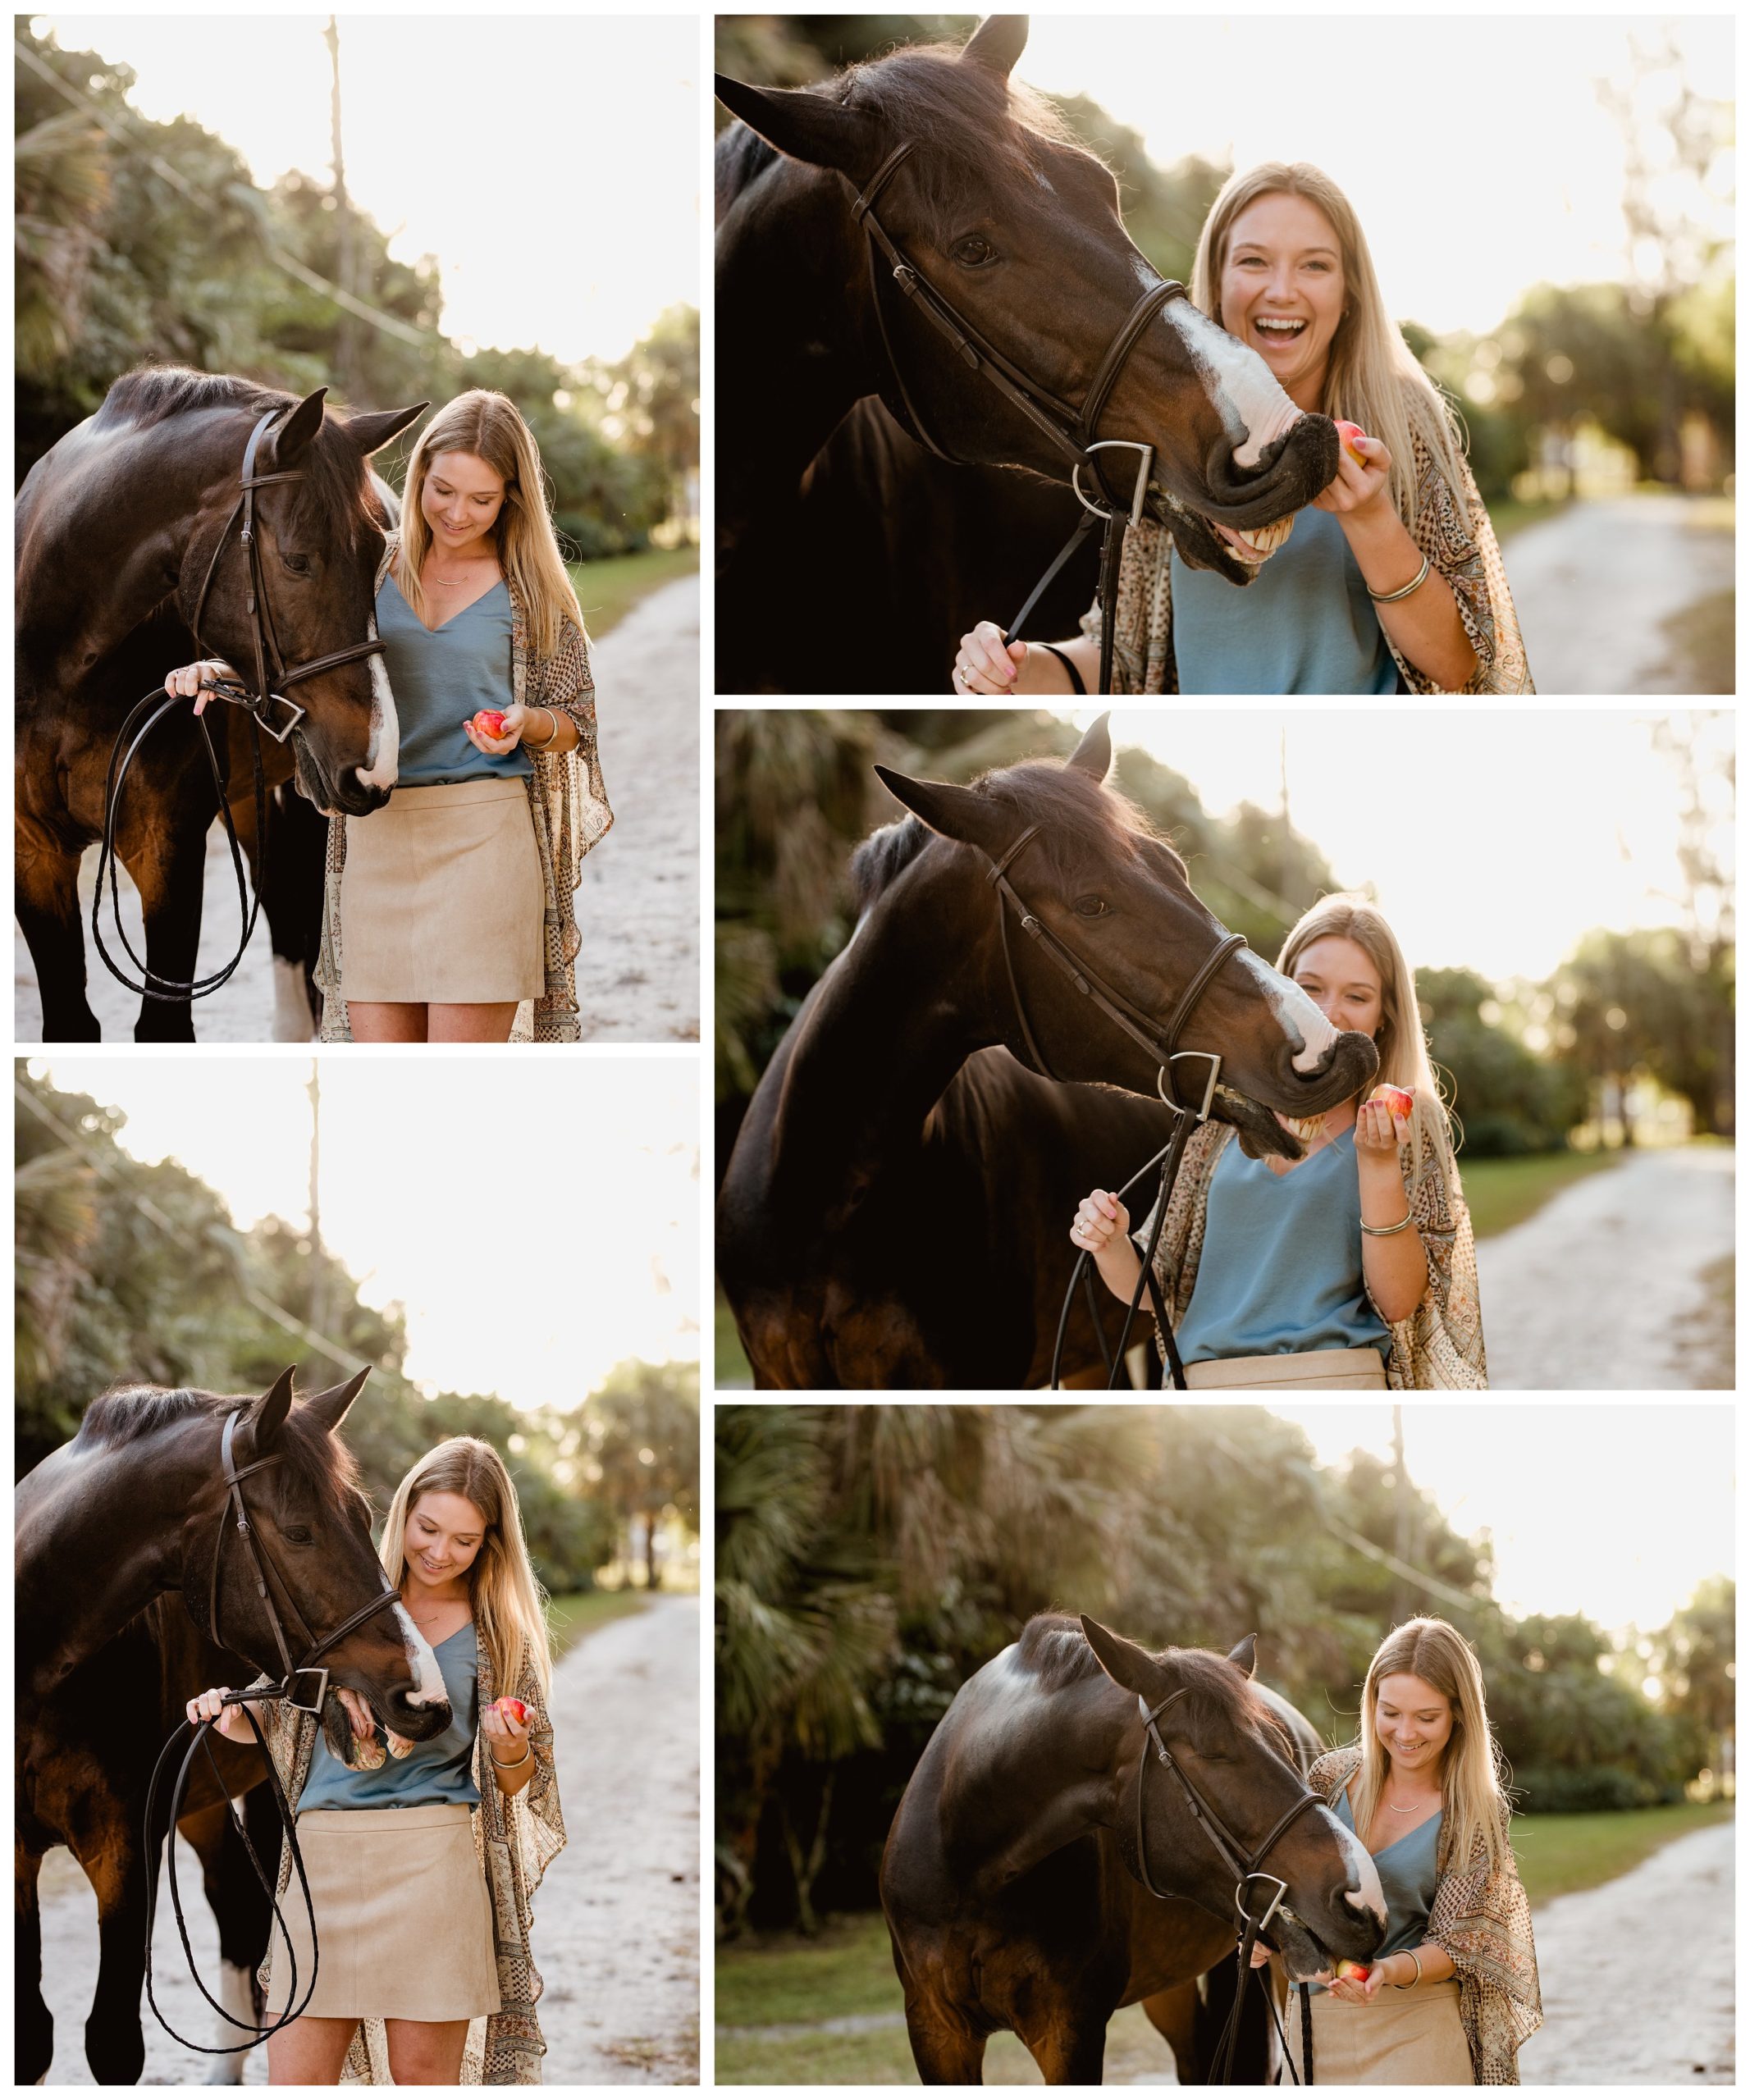 Natural and candid moment between horse and owner giving the horse and apple treat!